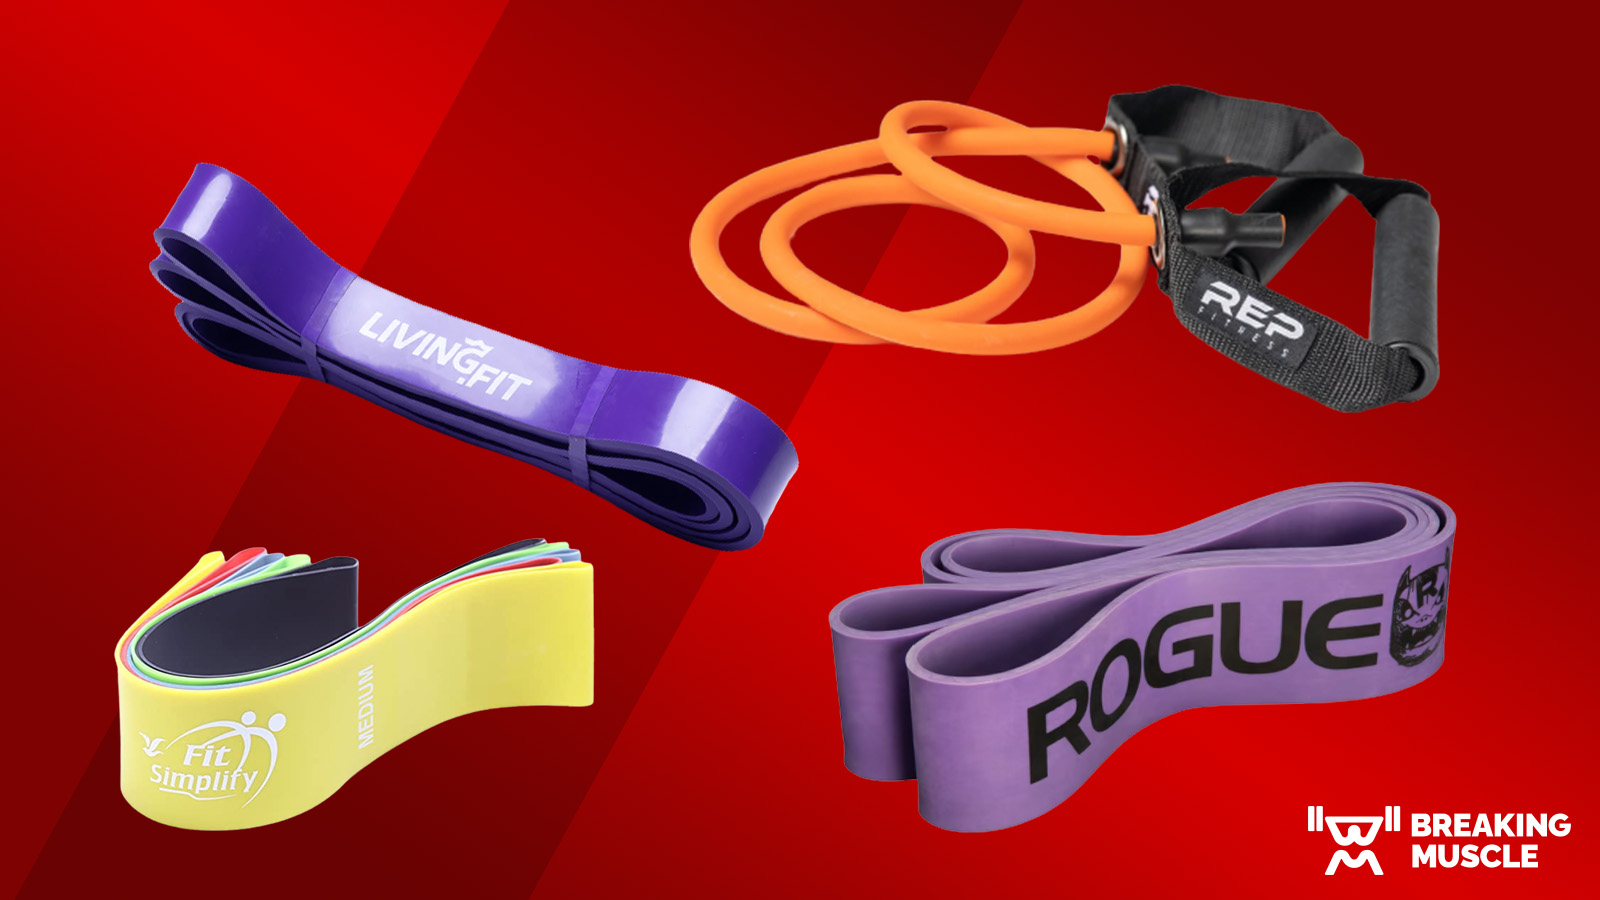 The 5 Best Exercise Bands